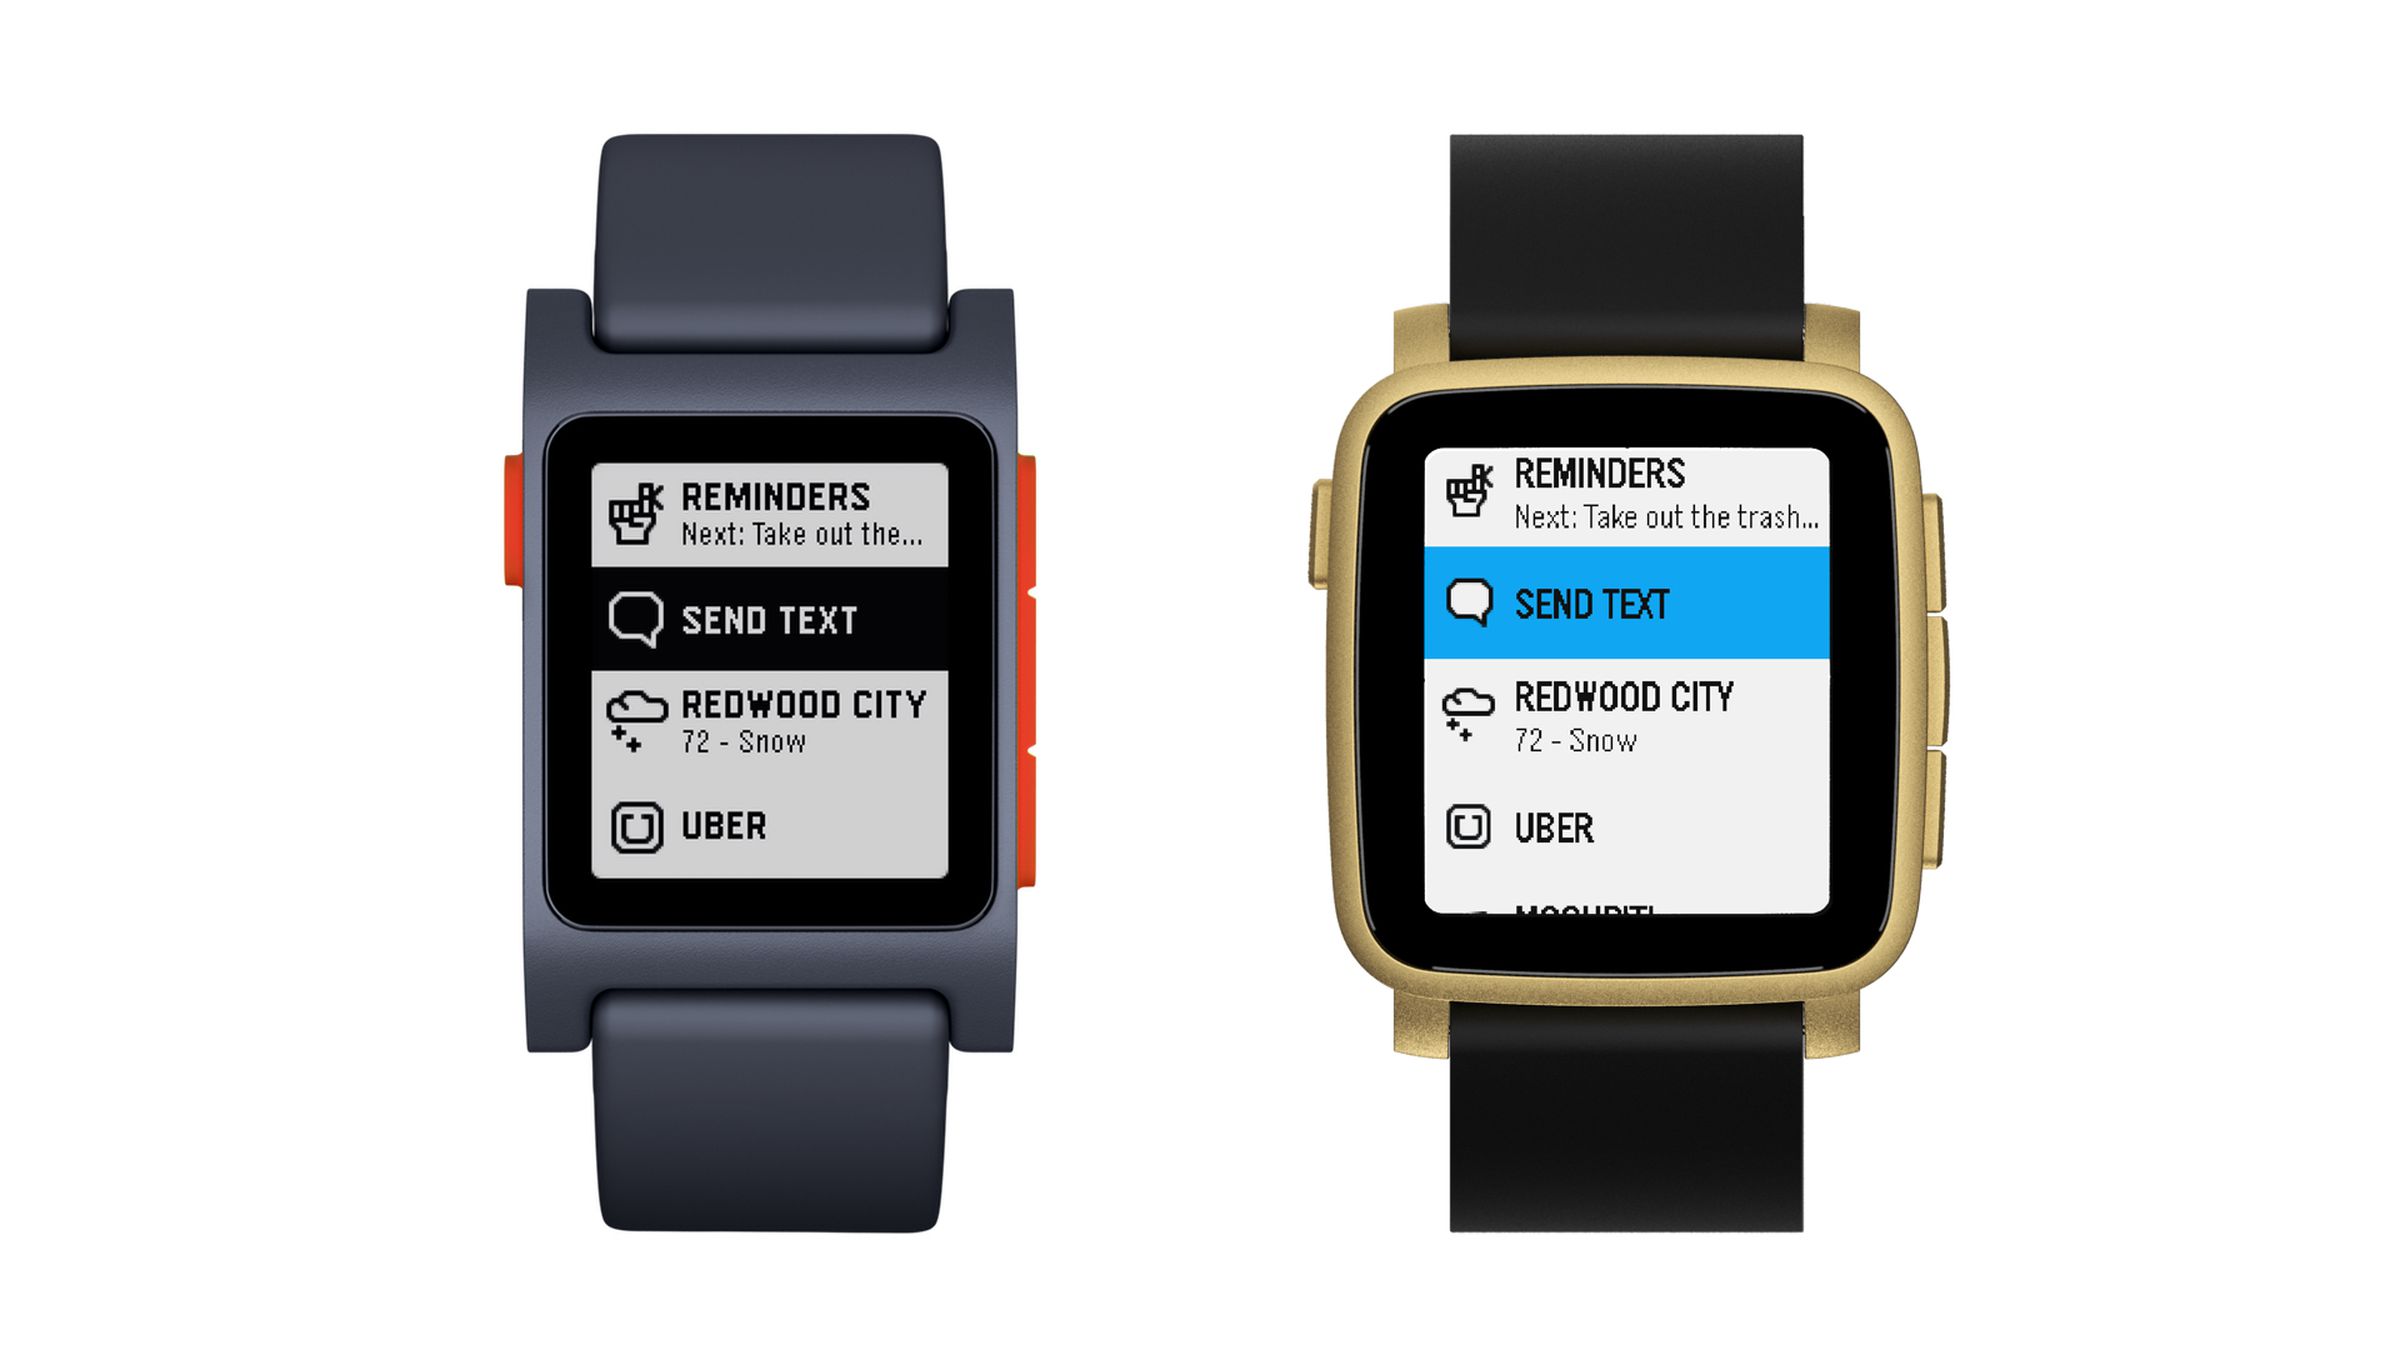 Pebble’s new quick view feature.